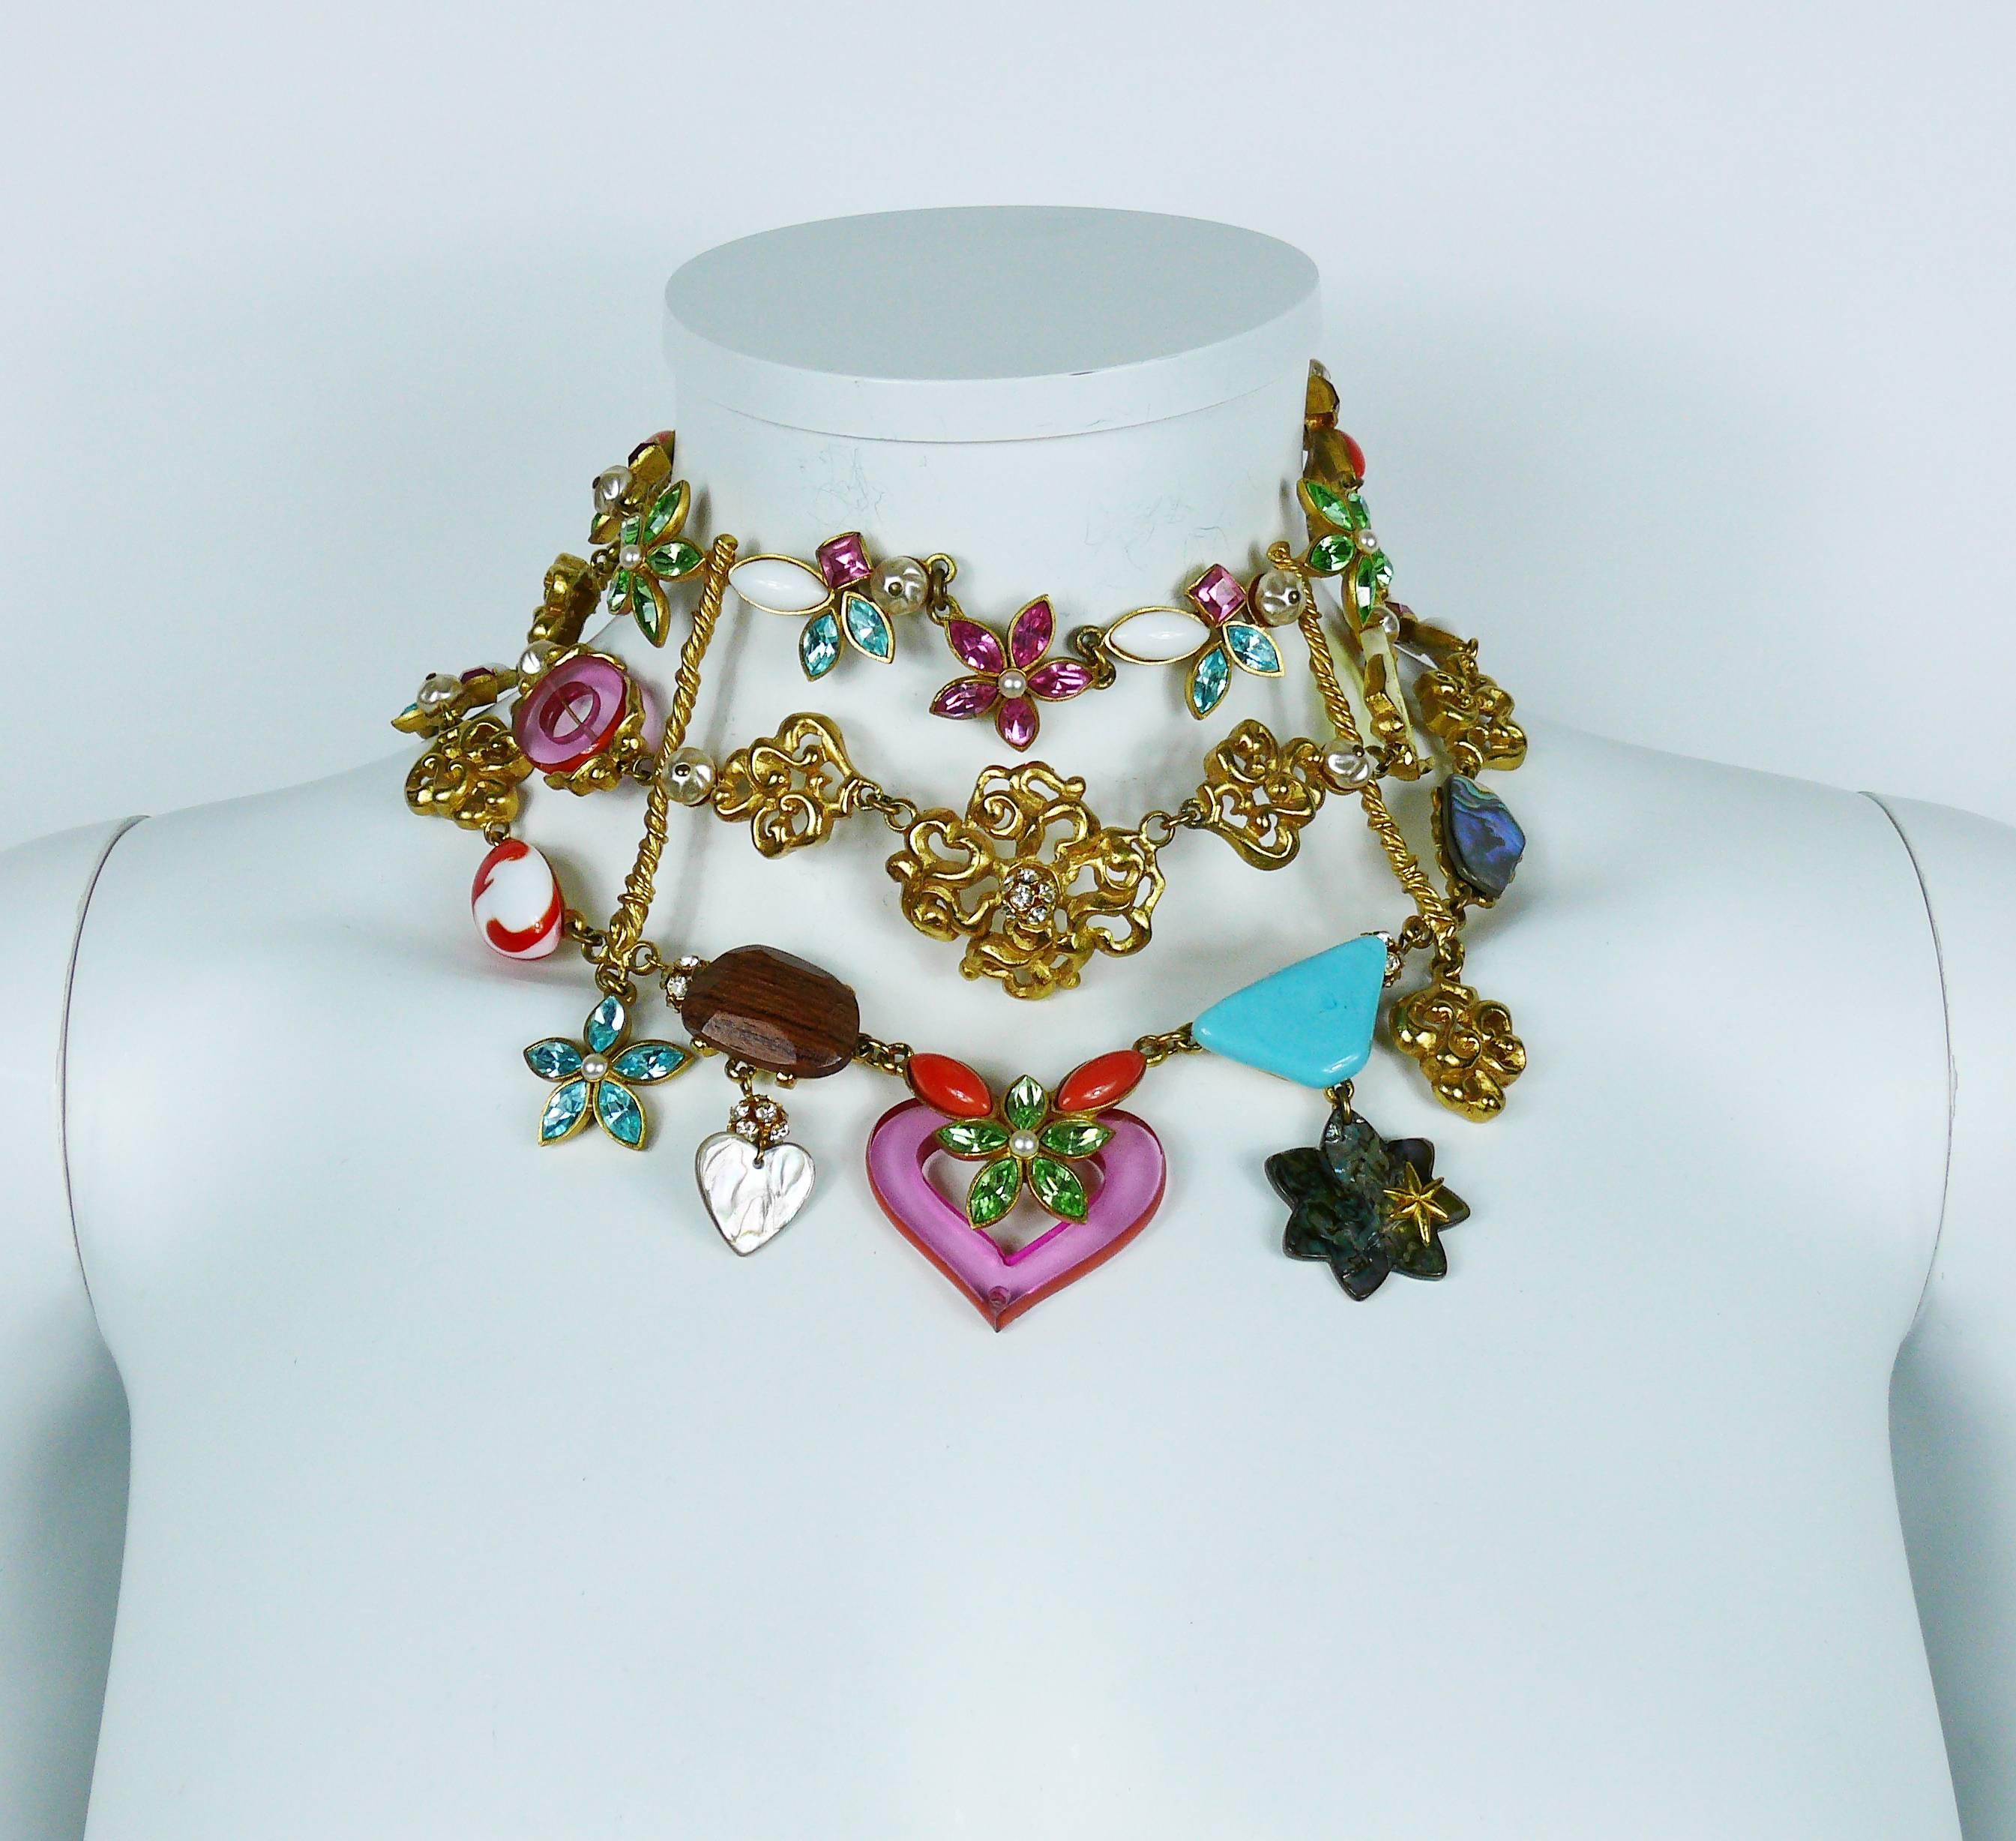 CHRISTIAN LACROIX vintage opulent choker necklace featuring three strands of multicolored crystals, faux pearls, glass cabochons, wood, iridescent mother of pear and lucite elements in a gold toned setting.

T-bar closure.
Extension